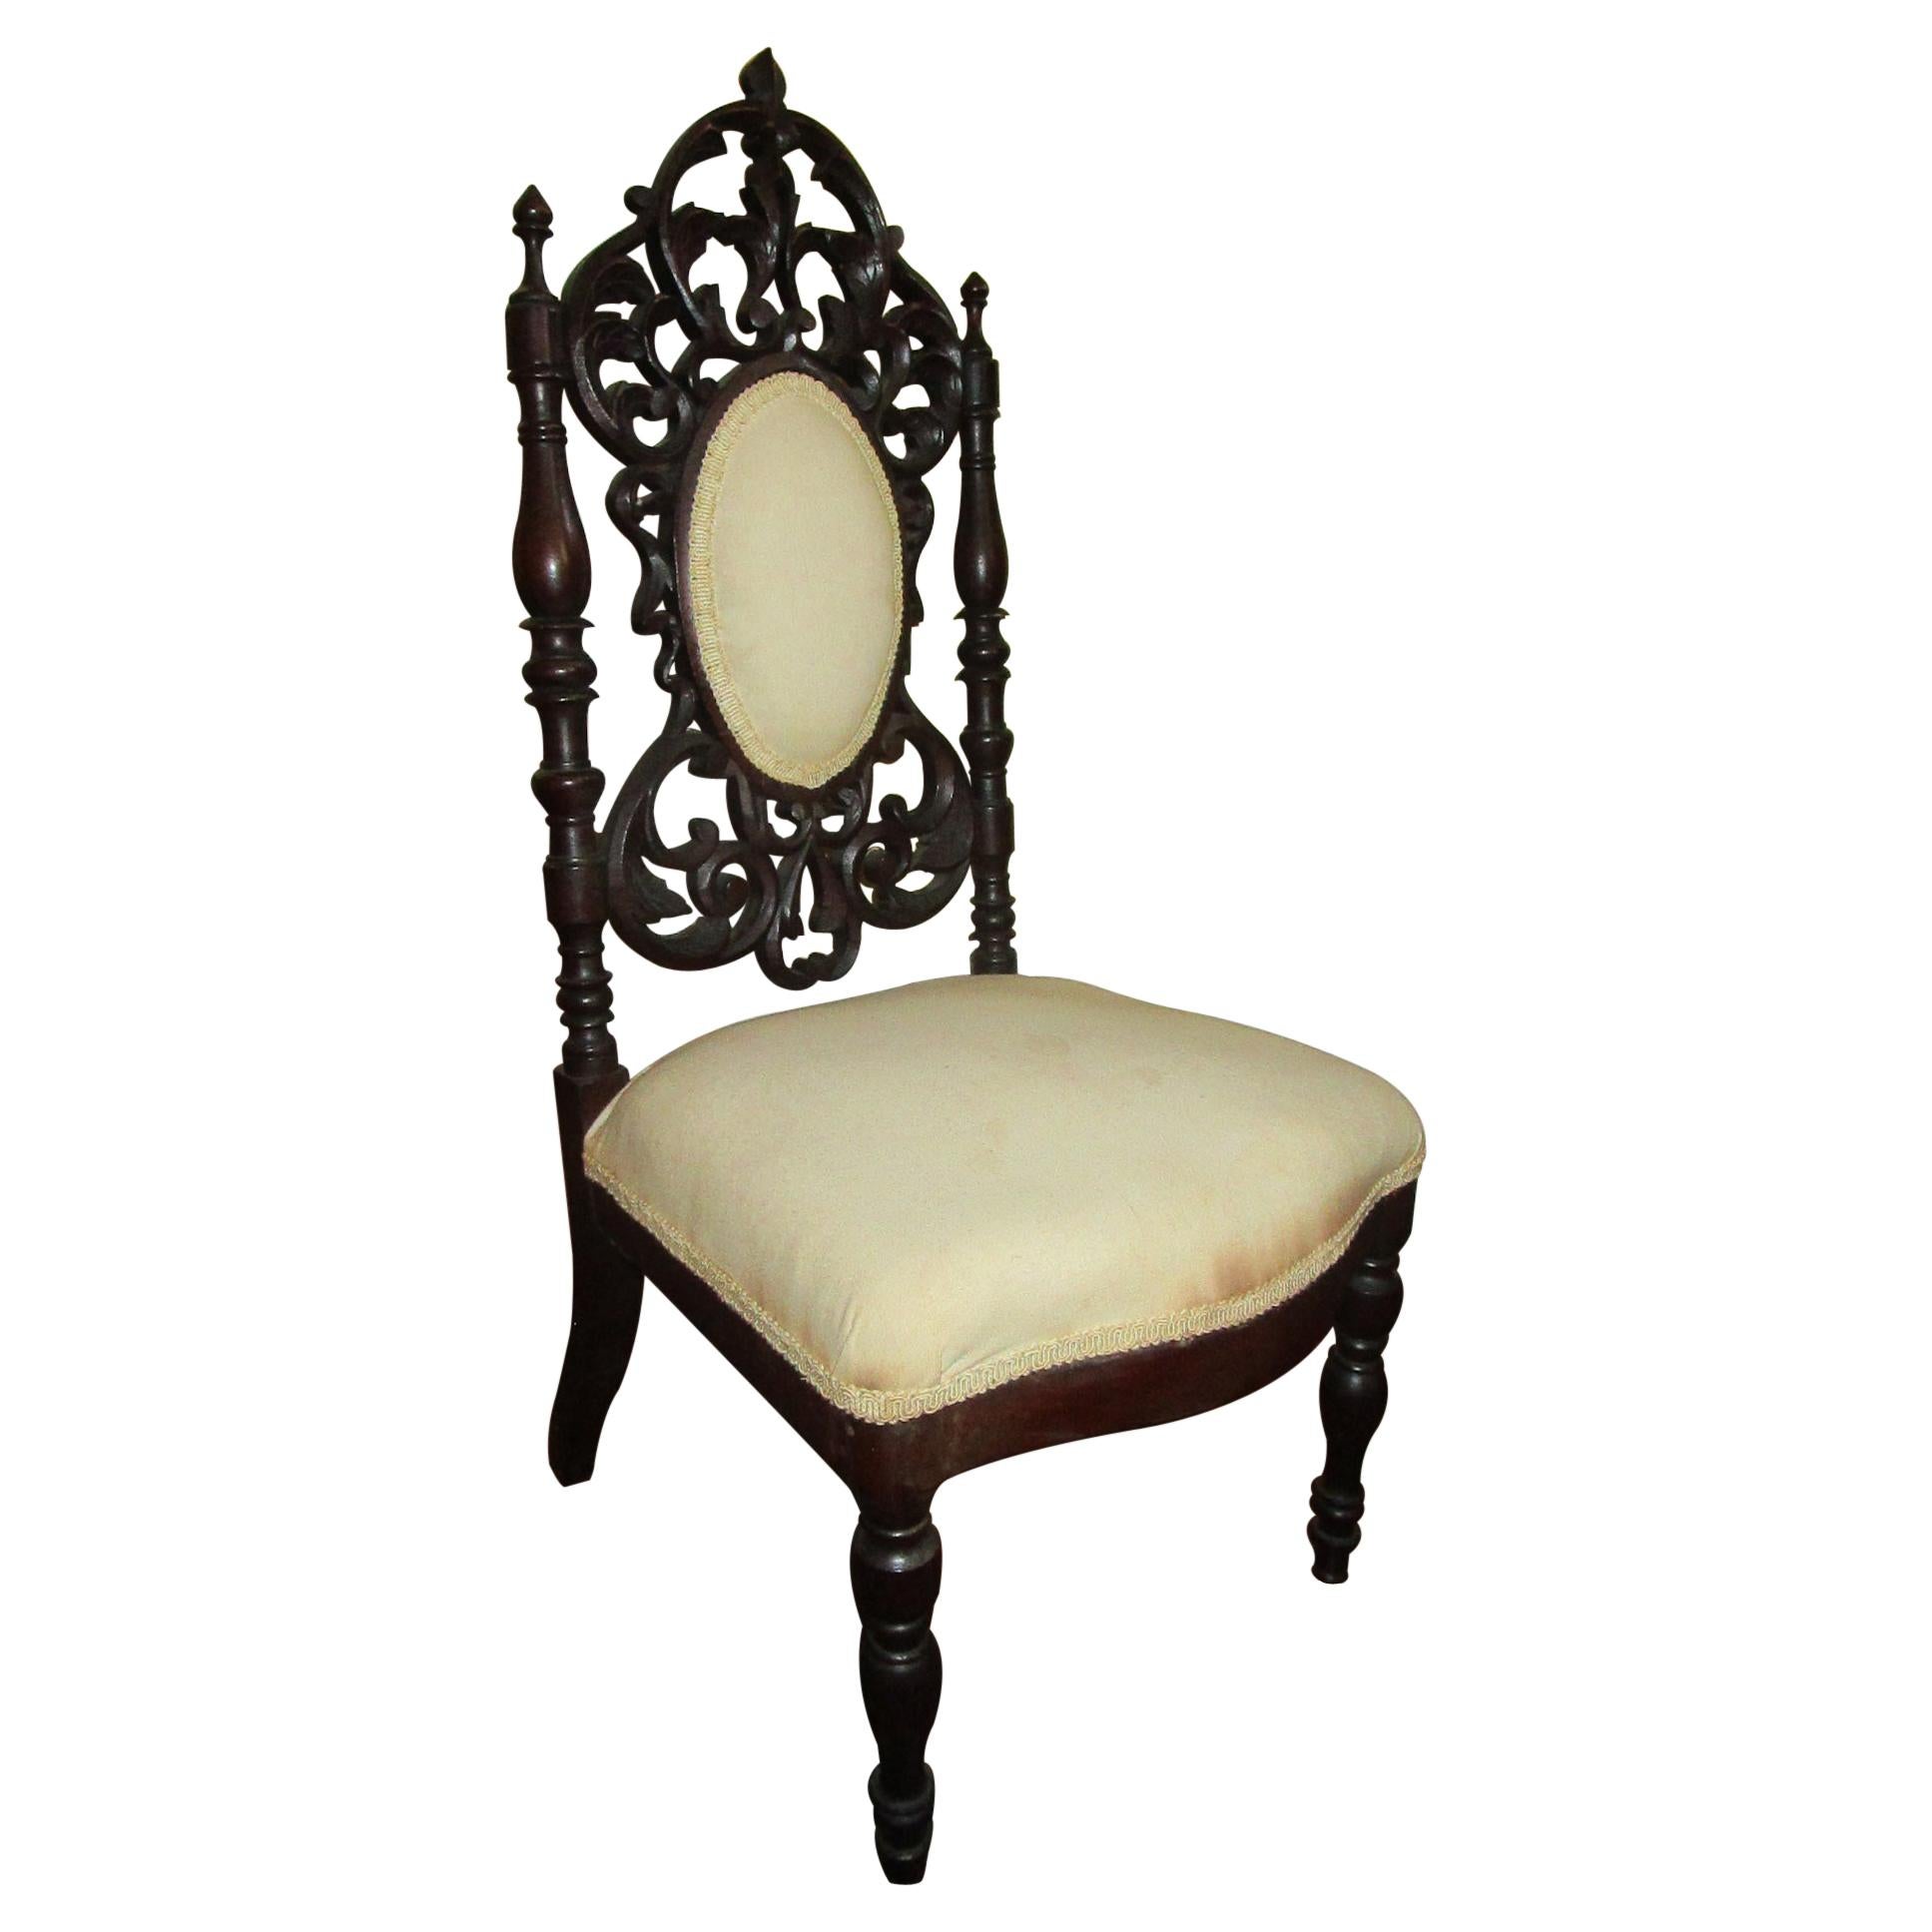 19th c. American Mahogany Rococo Revival Child's Chair with Tracery Back For Sale